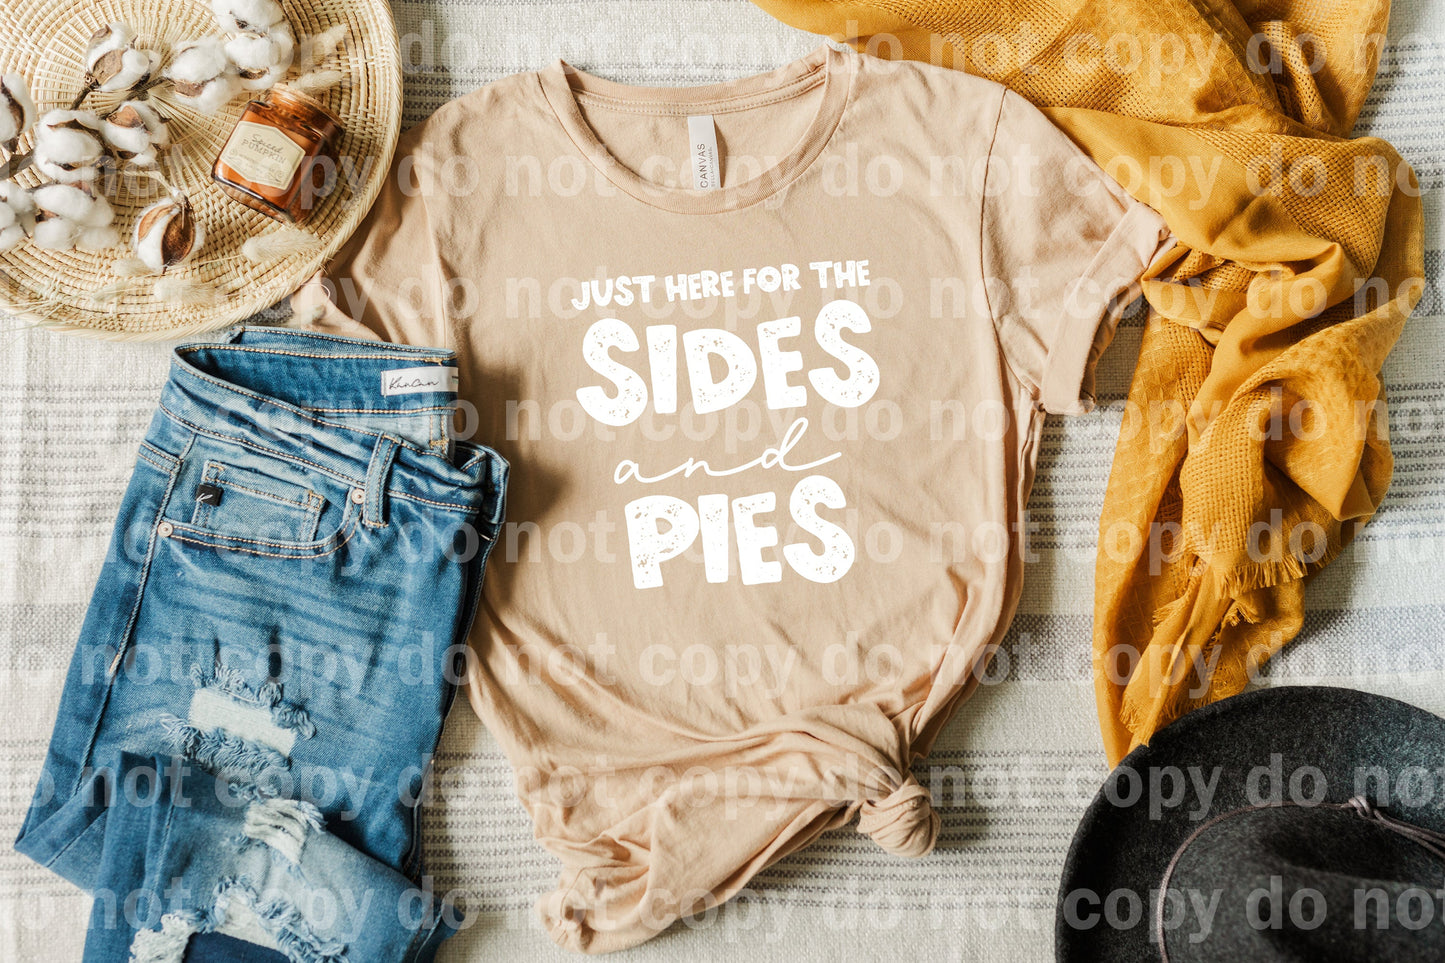 Just Here For The Sides And Pies Distressed Black/White Dream Print or Sublimation Print